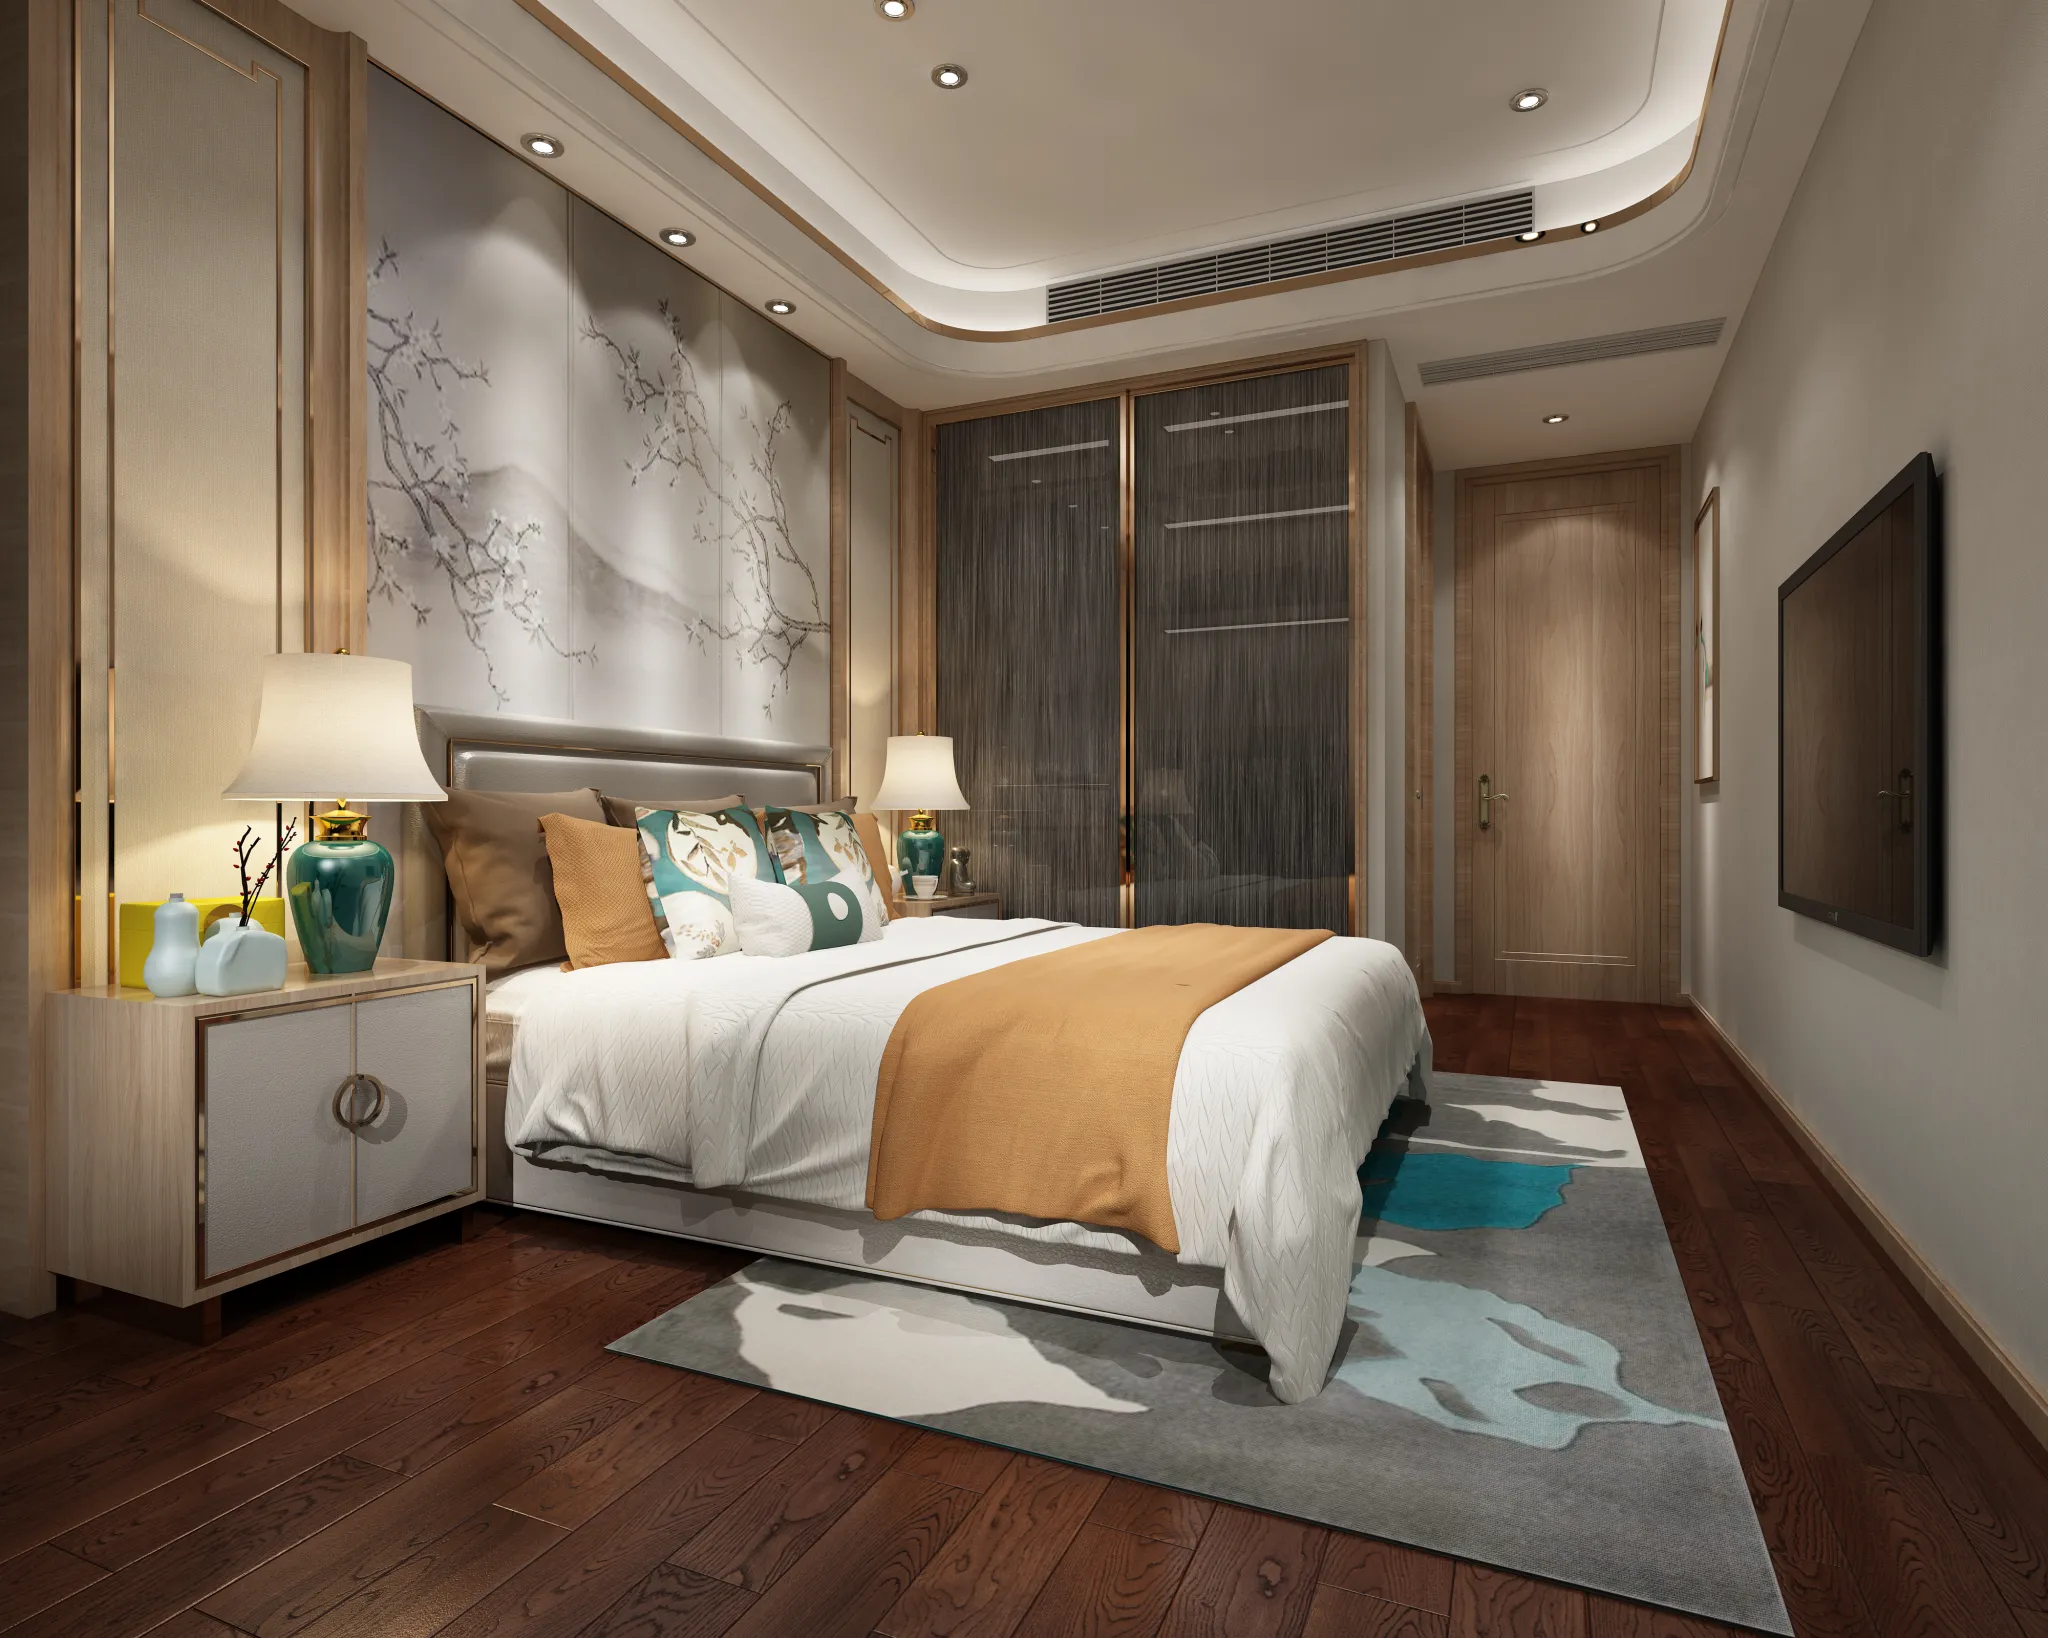 DESMOD INTERIOR 2021 (VRAY)/5. BEDROOM – 2. CHINESE STYLES – 043